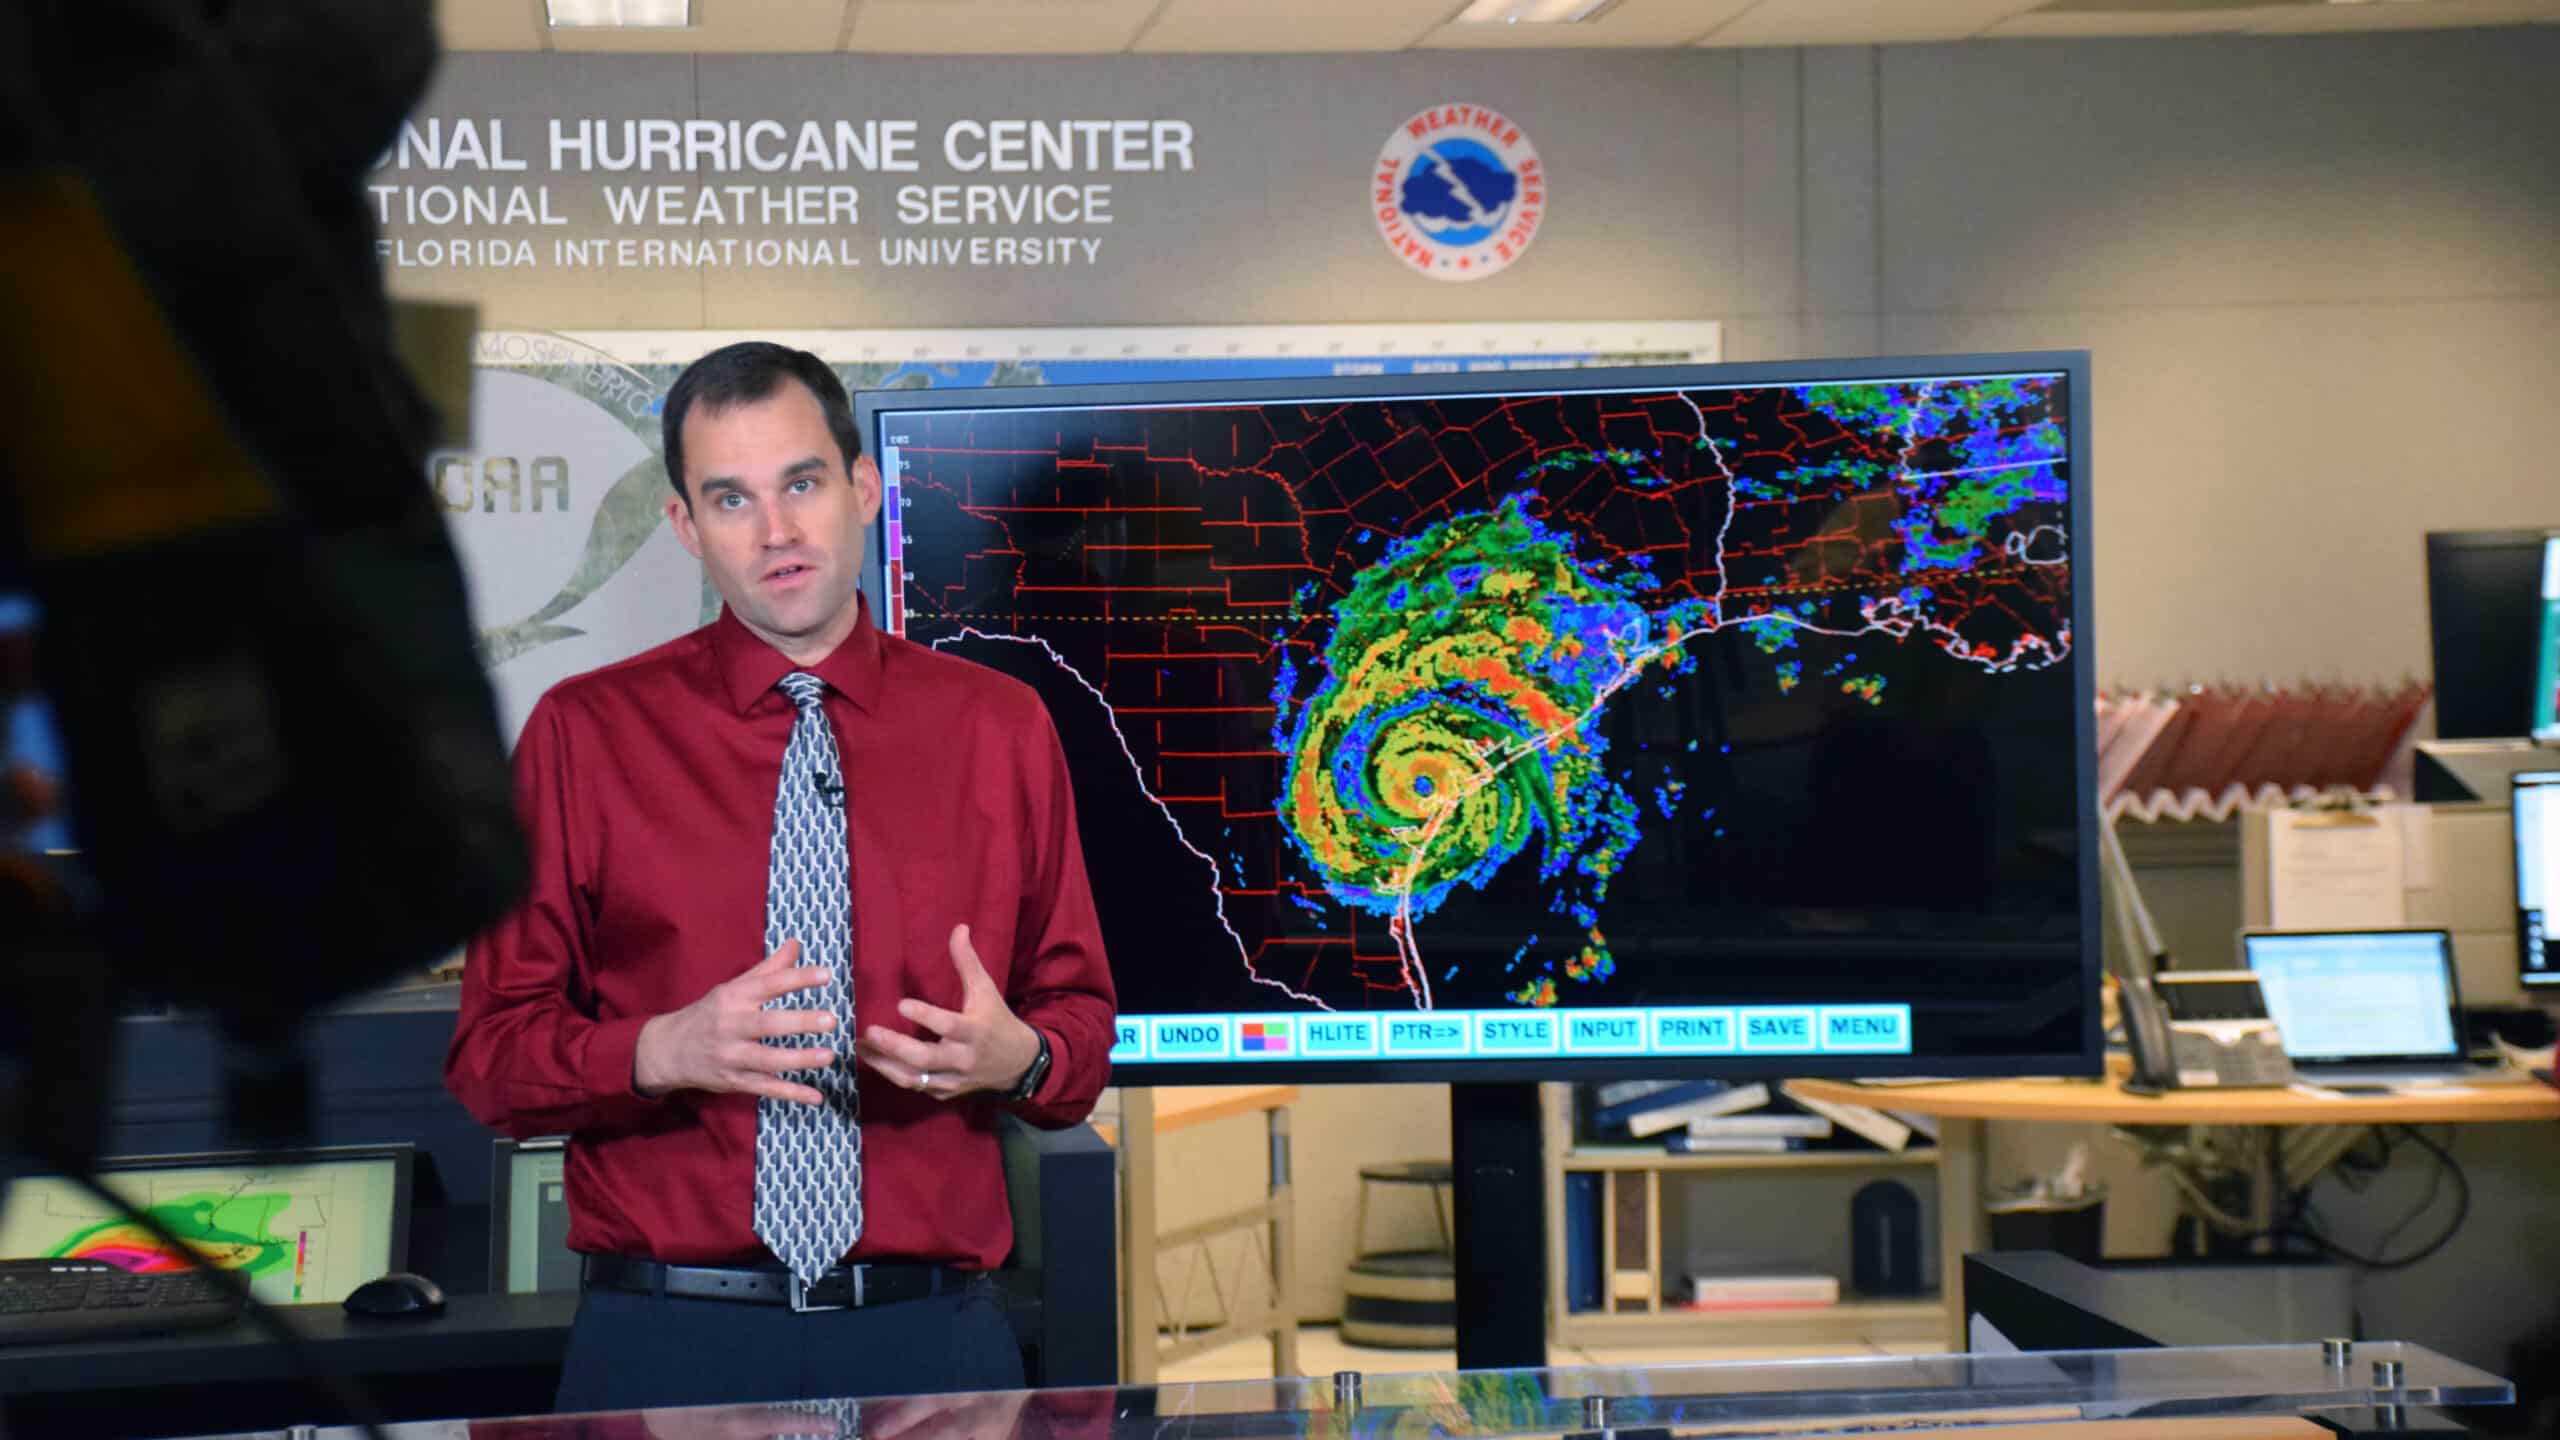 New National Hurricane Center director Michael Brennan earned his bachelor's, master's and doctoral degrees at NC State.